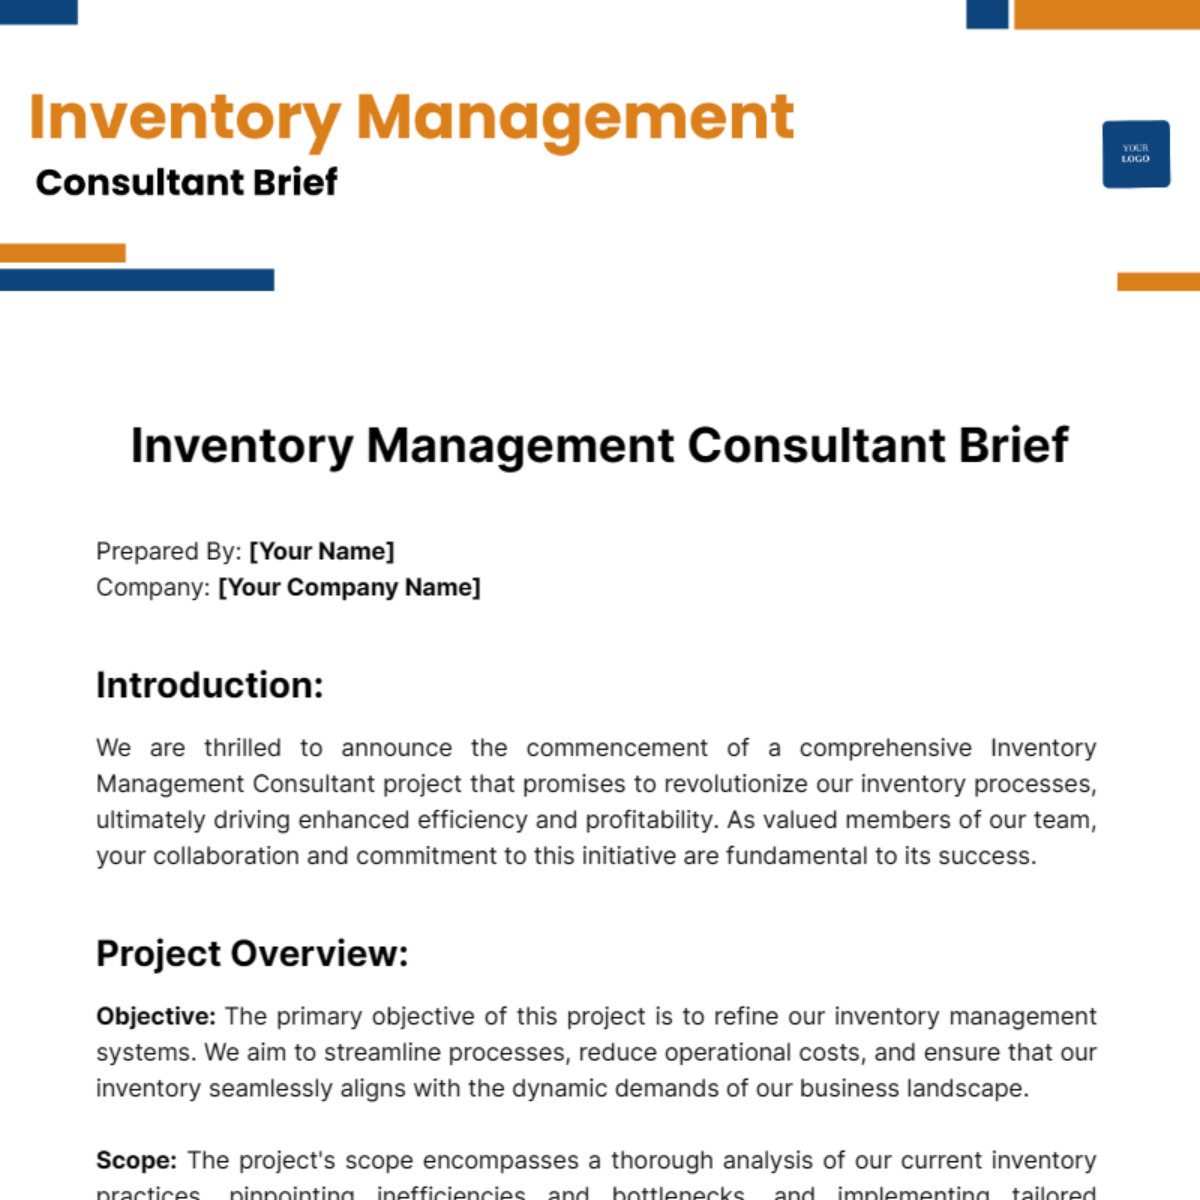 Inventory Management Consultant Brief Template